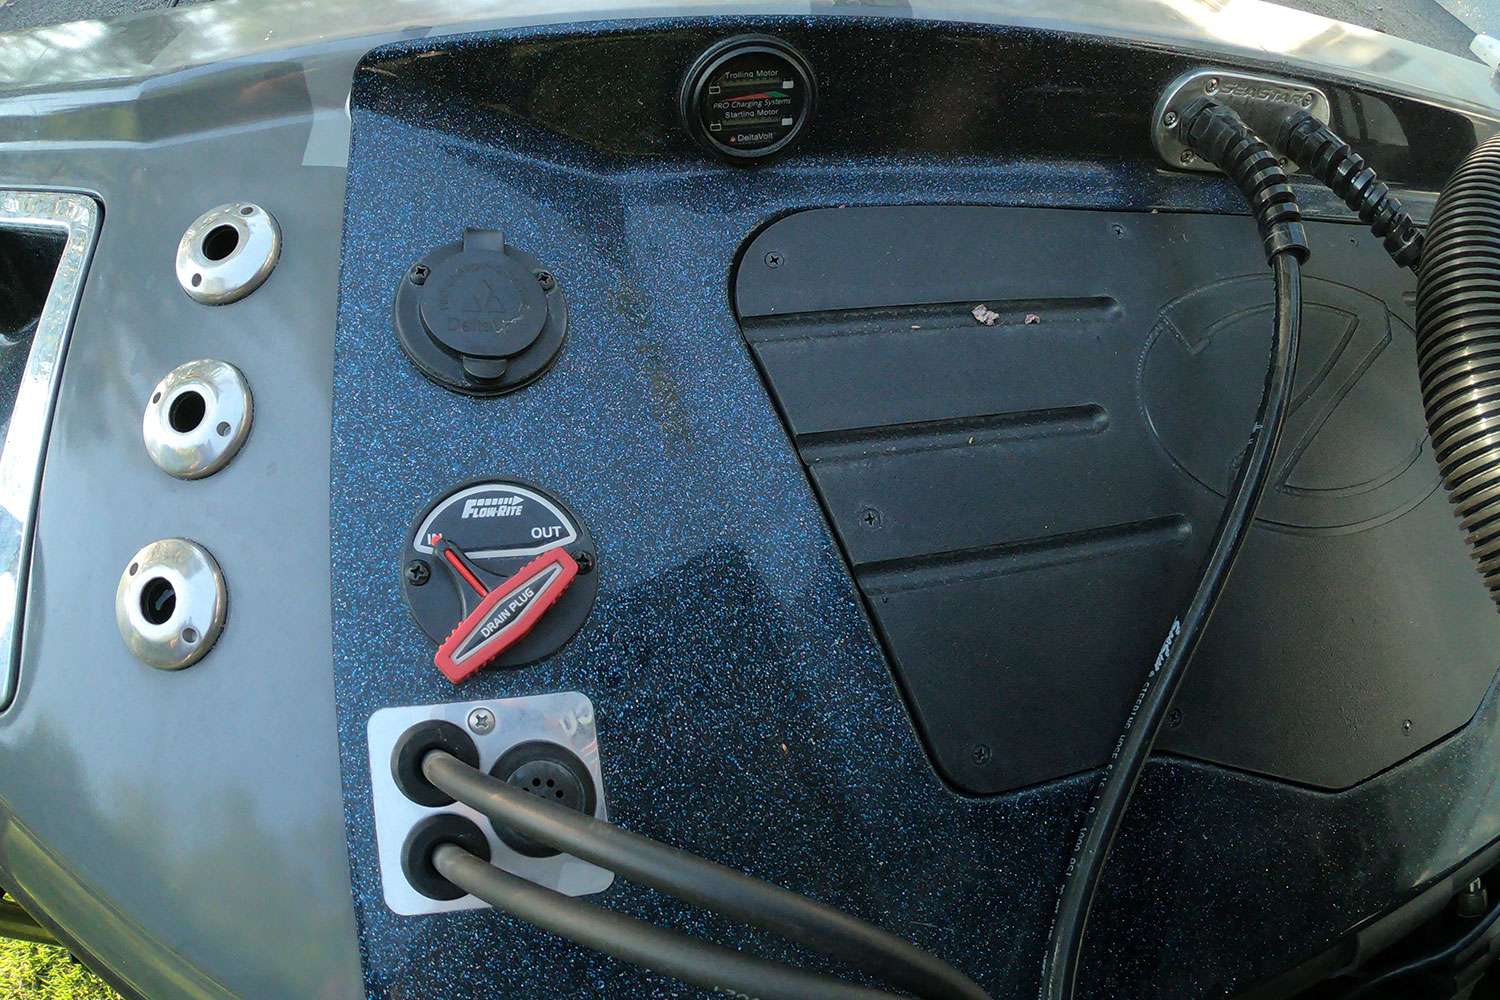 At the rear of his boat are some interesting controls. At the top is a meter that indicates battery charge as it's charging. And then there's the boat plug remover â you no longer have to stoop down and crawl beneath the boat to remove the plug. The red switch makes it happen. Brilliant idea thanks to Ranger Boats engineers. 